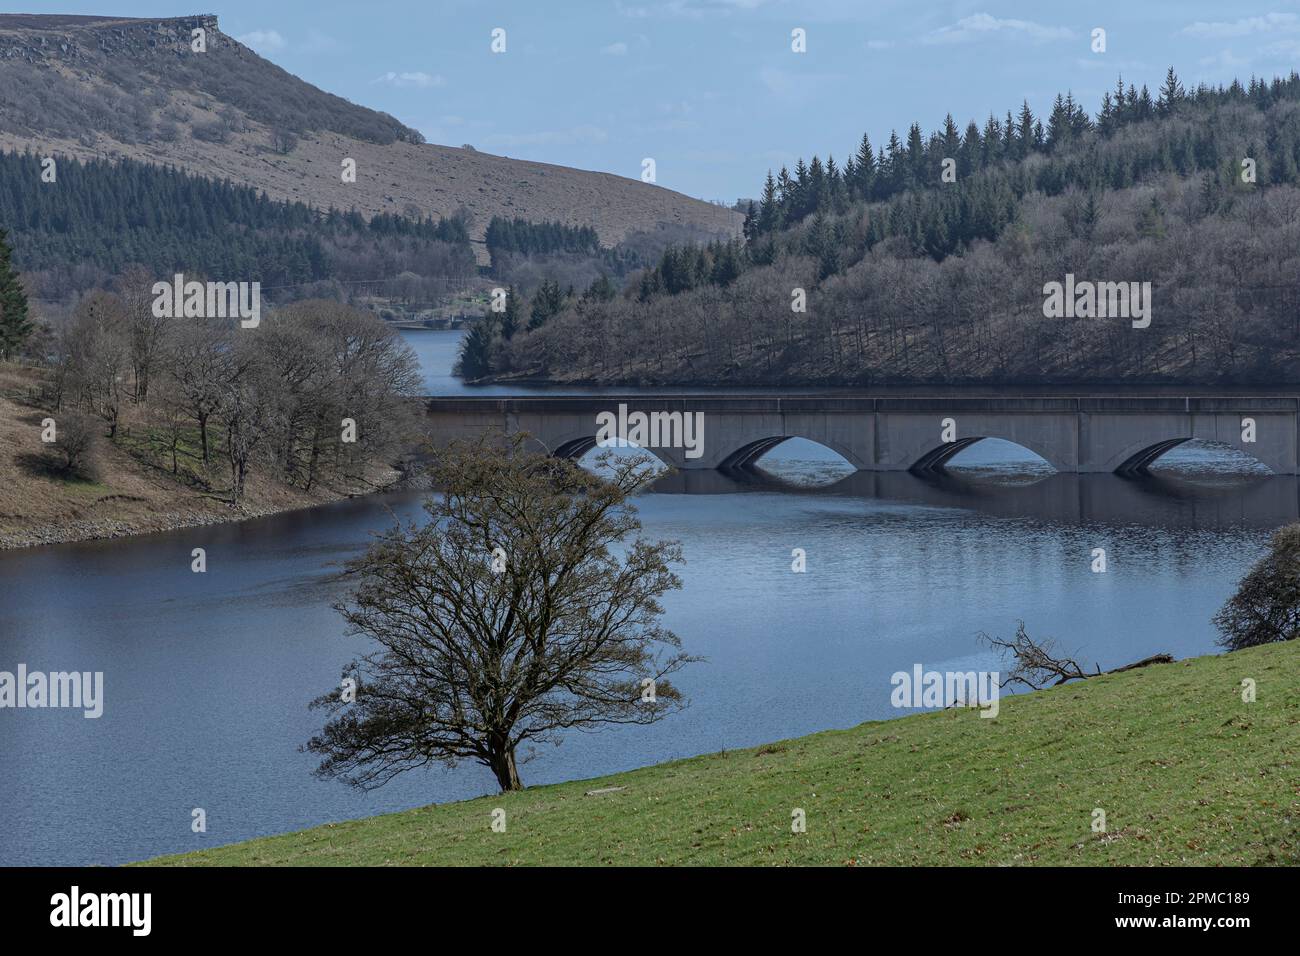 Bridge crossing Lady Bower Reservoir in Spring on a cool day Stock Photo